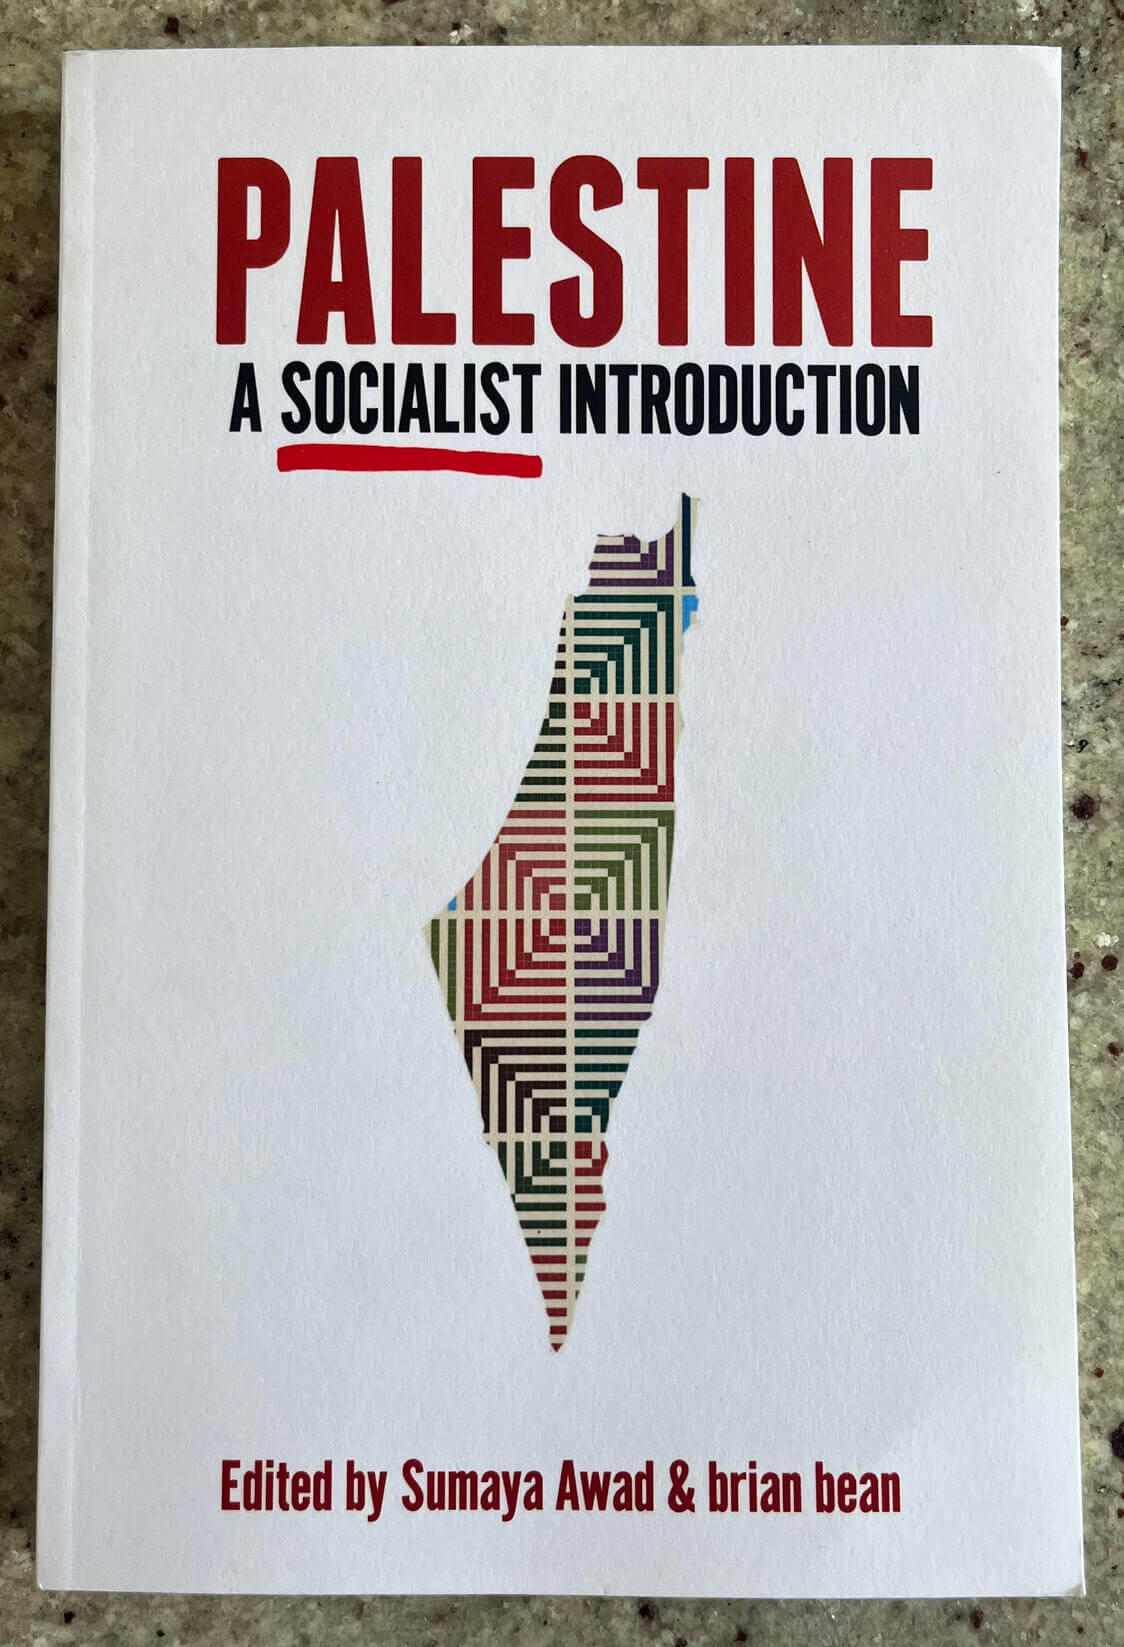 “Palestine: A Socialist Introduction” edited by Sumaya Awad and brian bean